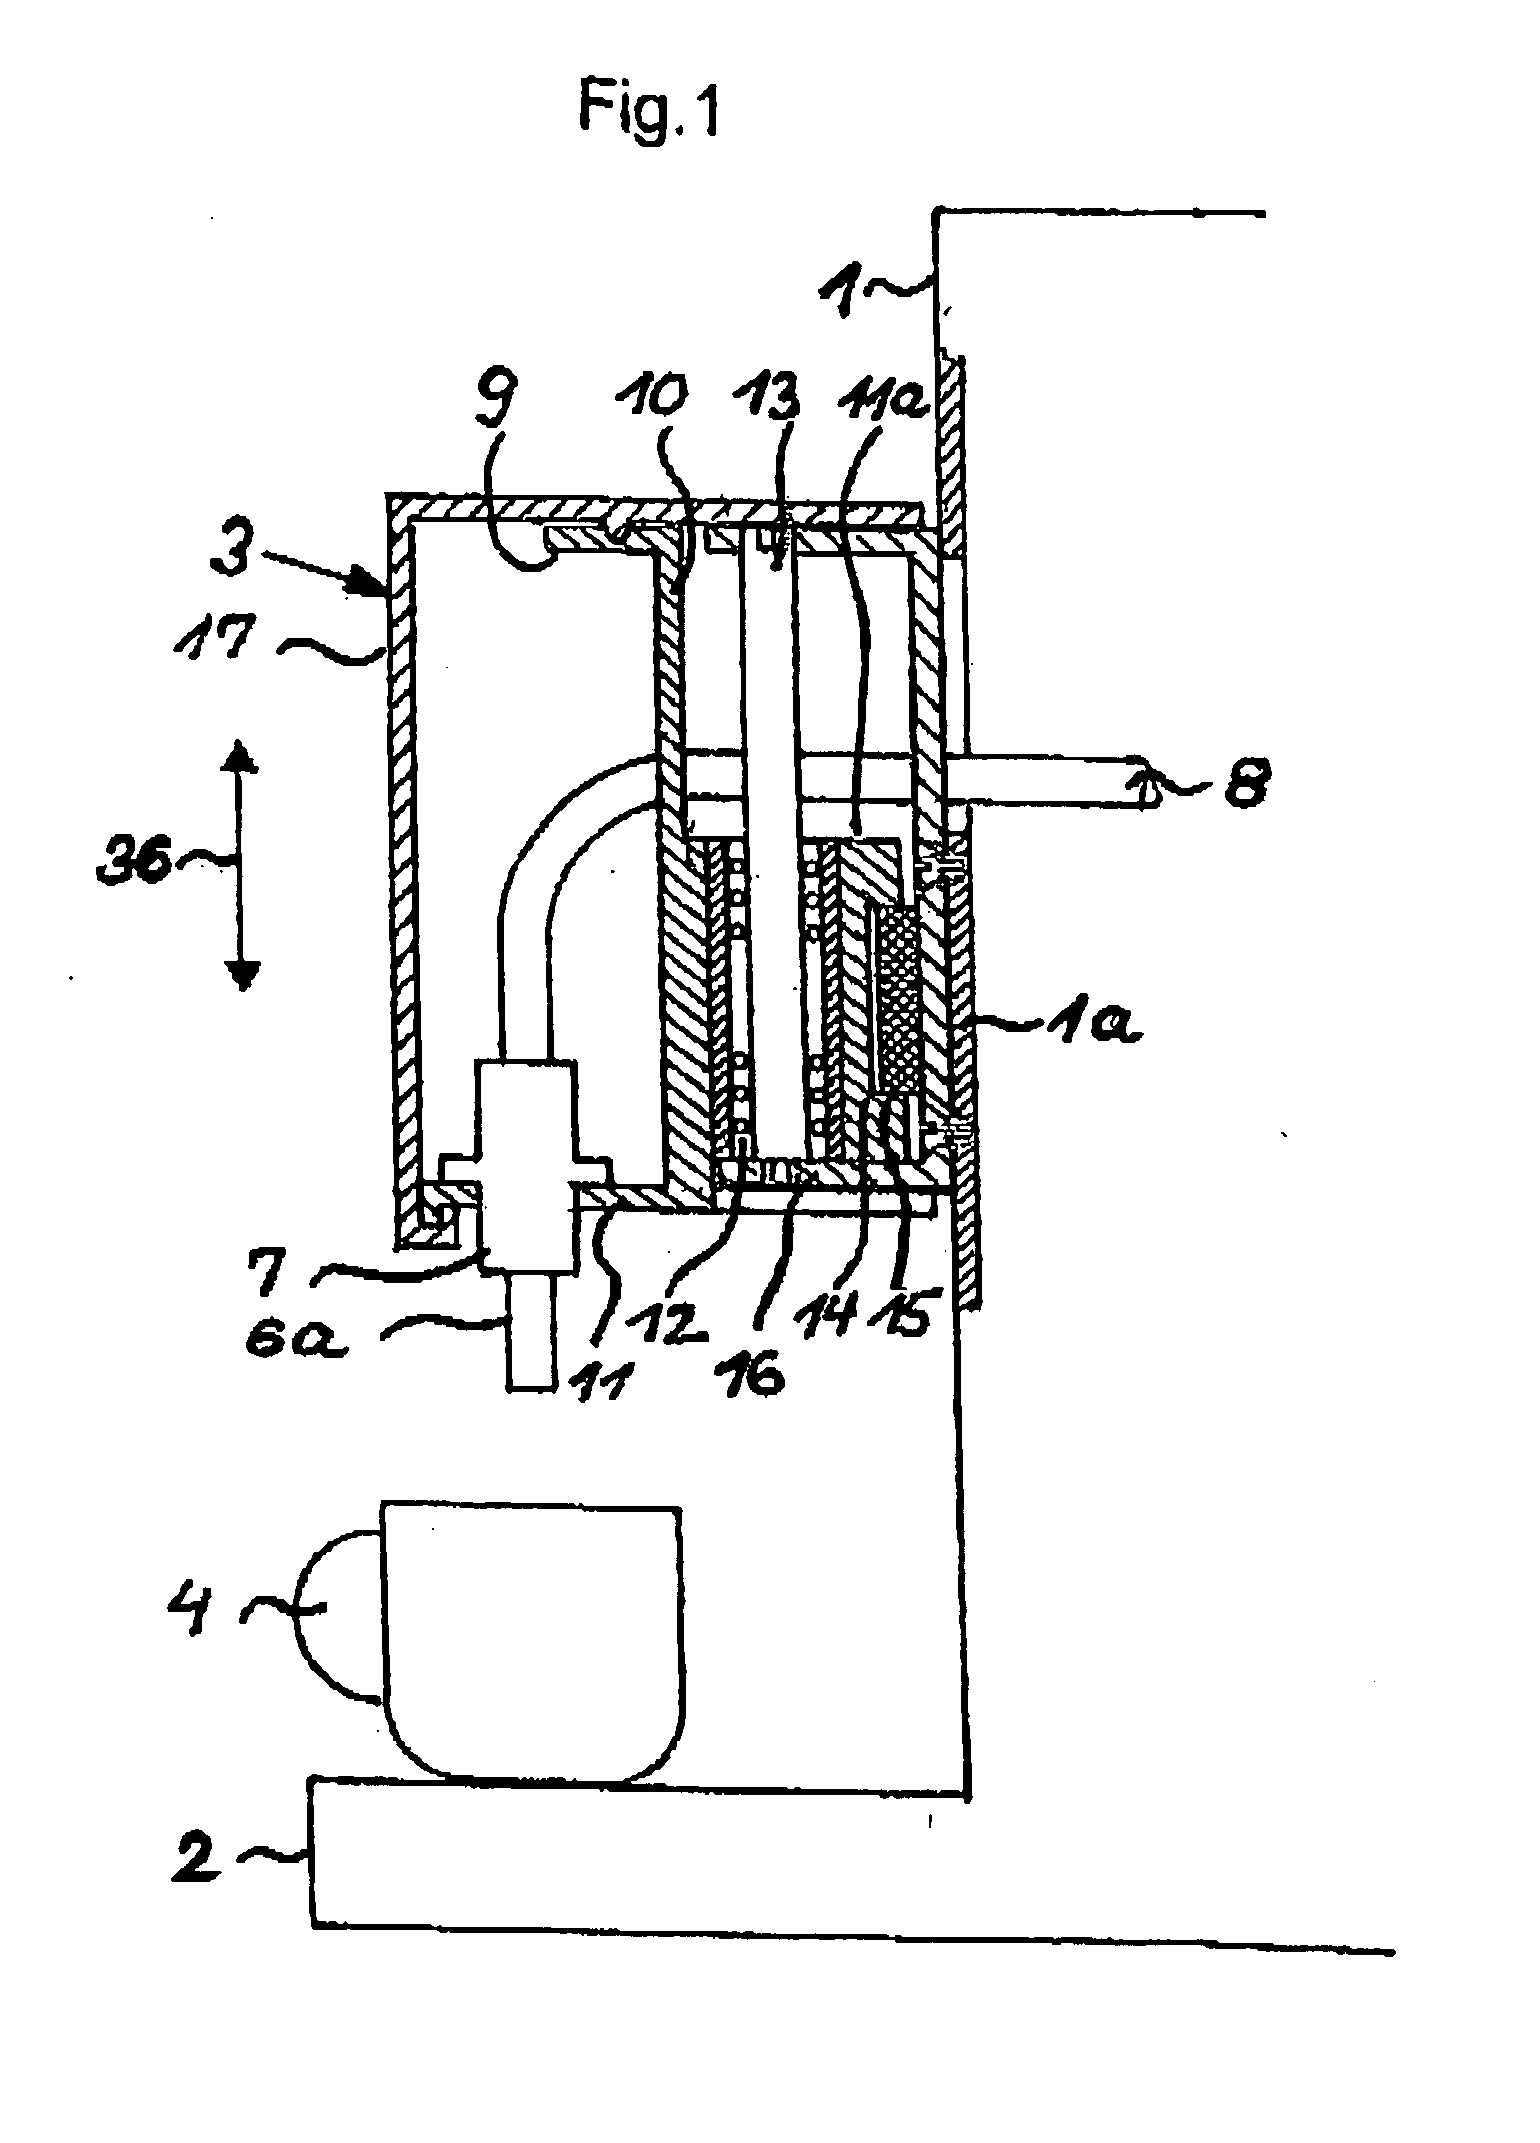 Coffee automat having a vertically adjustable and lockable outflow unit